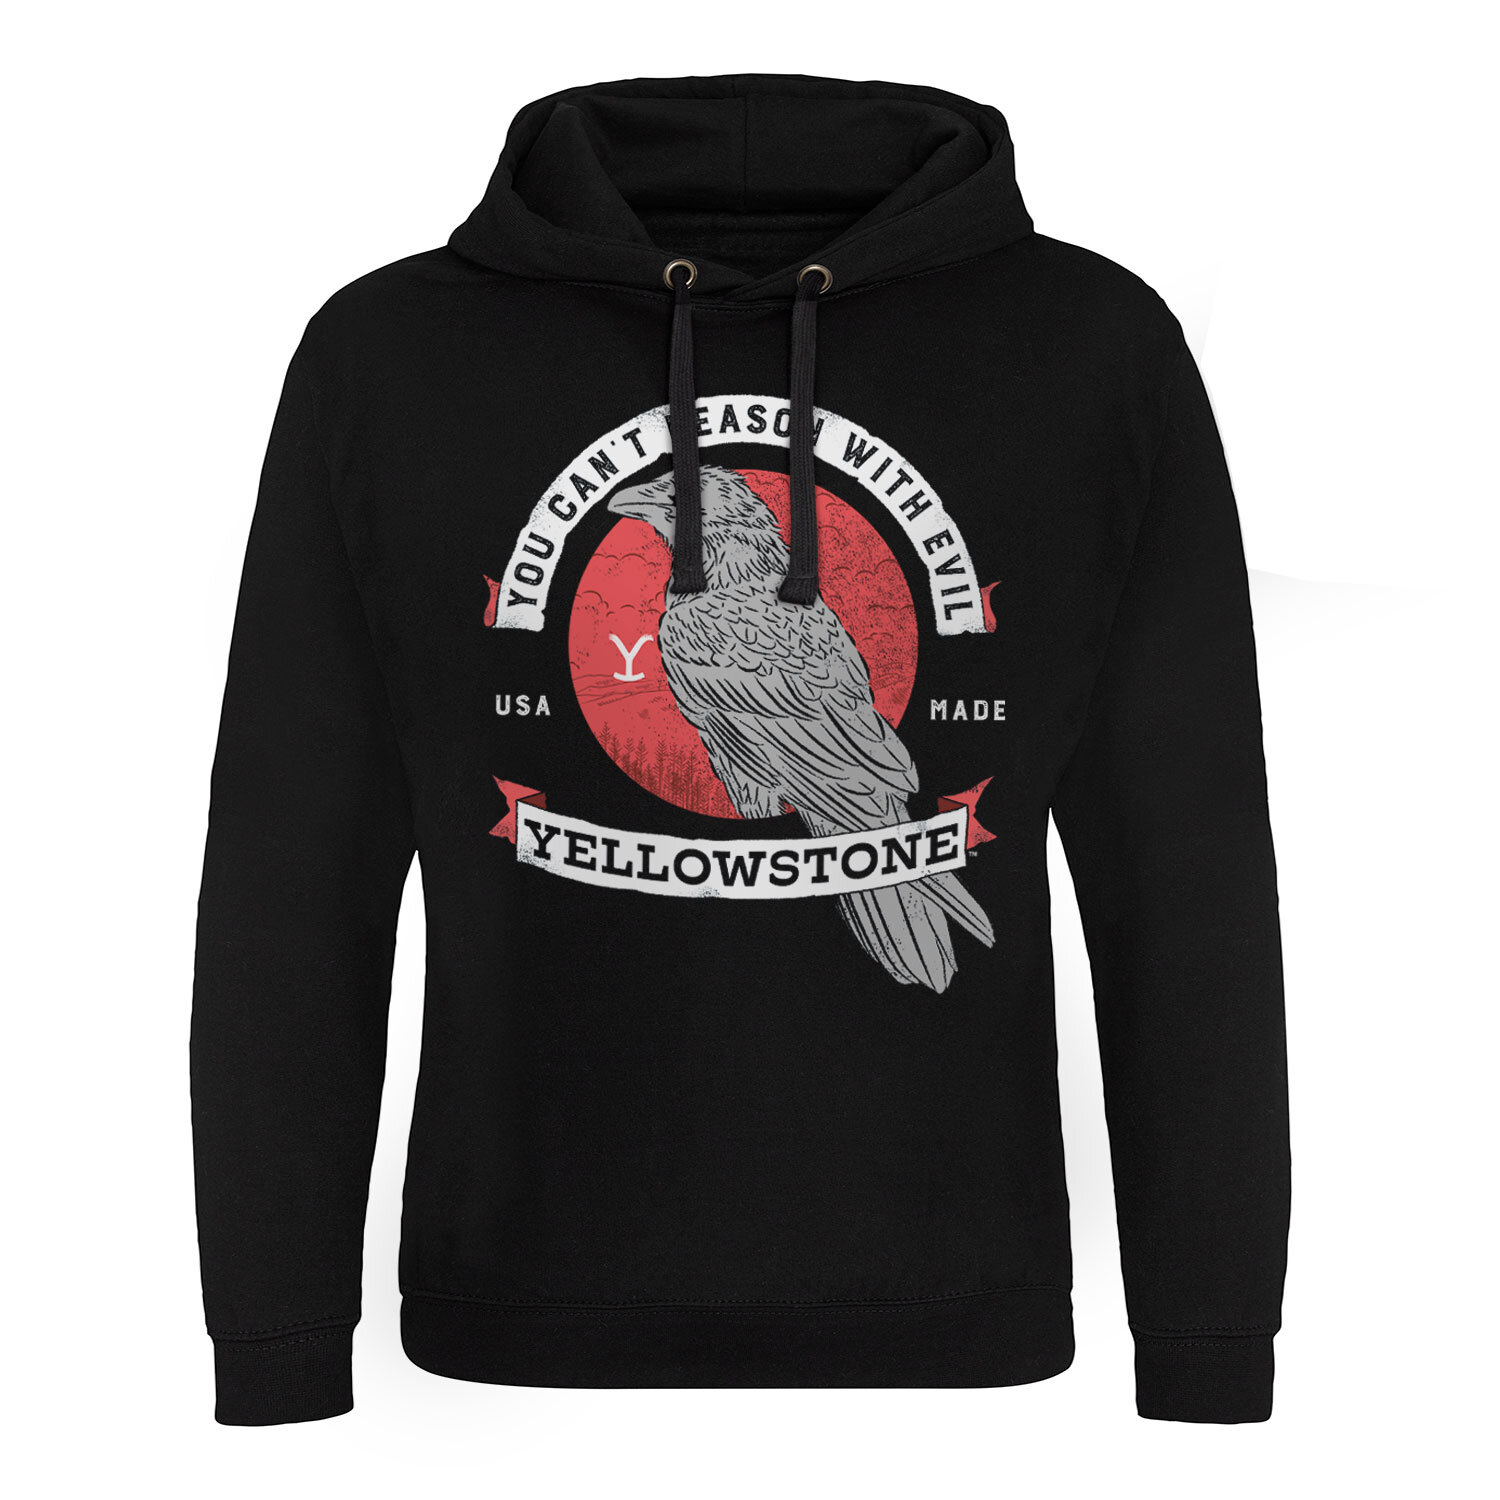 You Can't Reason With Evil Epic Hoodie